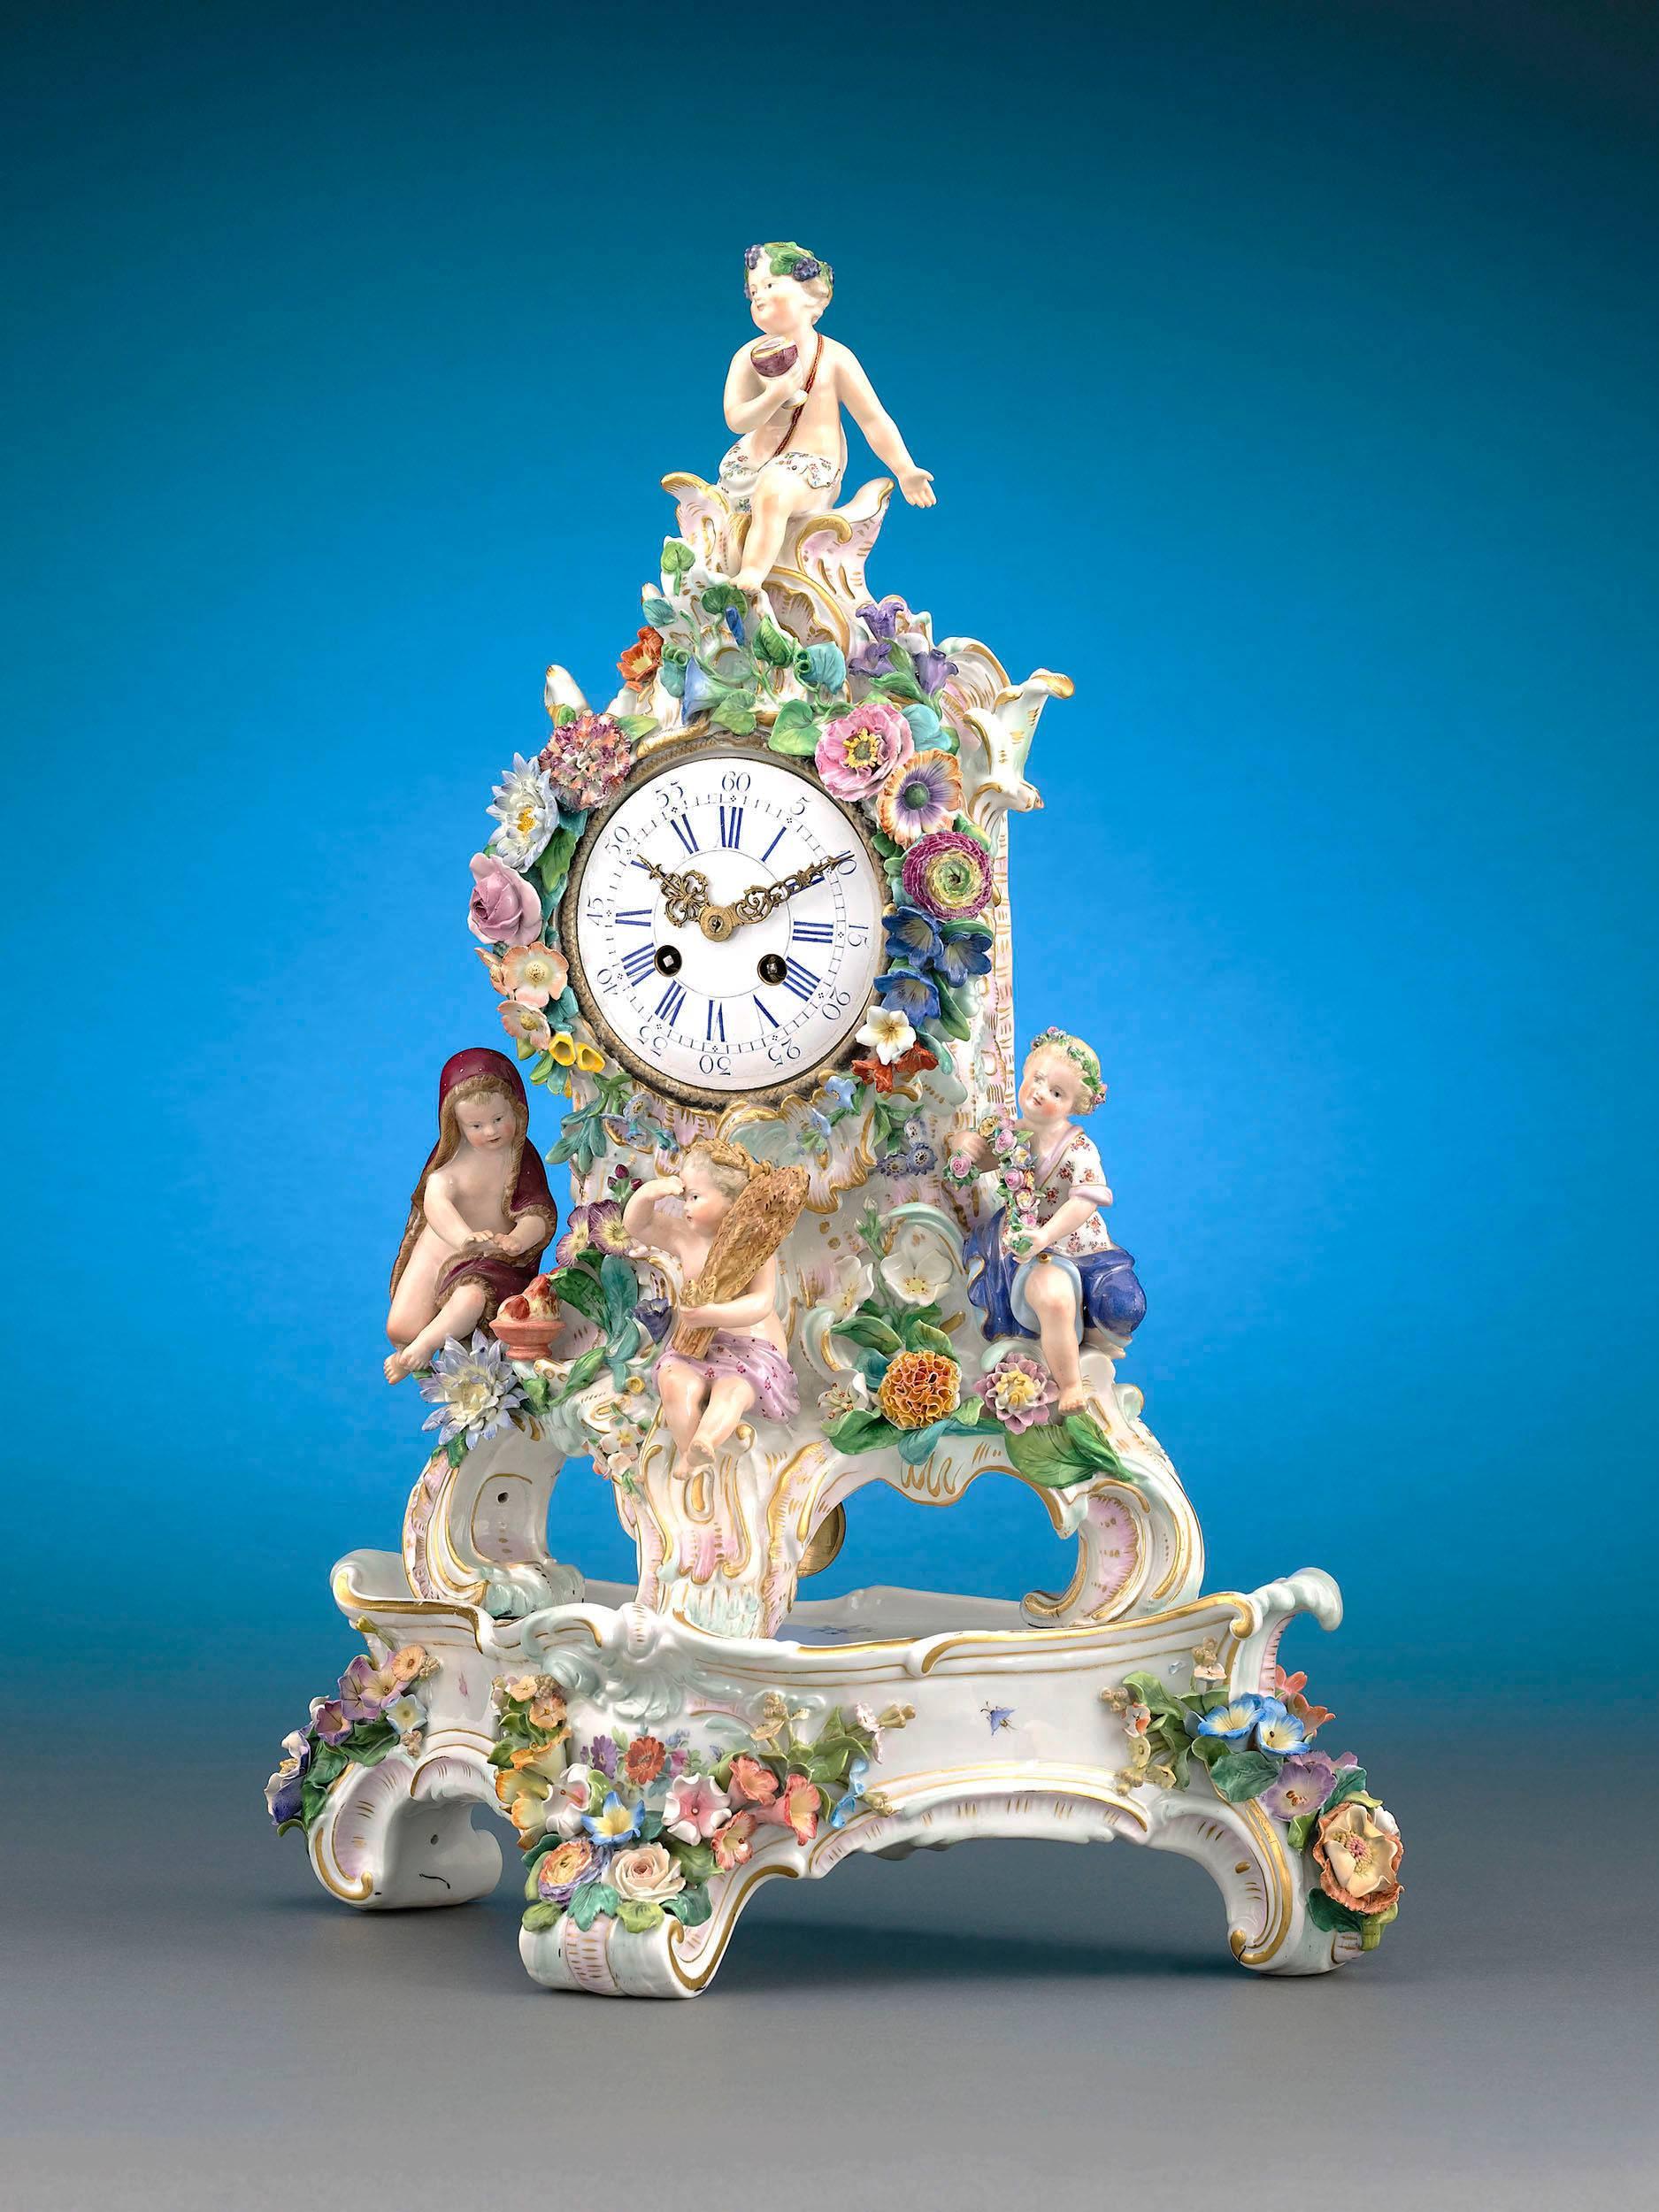 This ornate Meissen porcelain mantel pendulum clock showcases the company's mastery of allegorical themes with its striking depiction of the Four Seasons. Winter is enveloped in a warm cloak, fall holds a sheath of wheat, spring embraces a floral